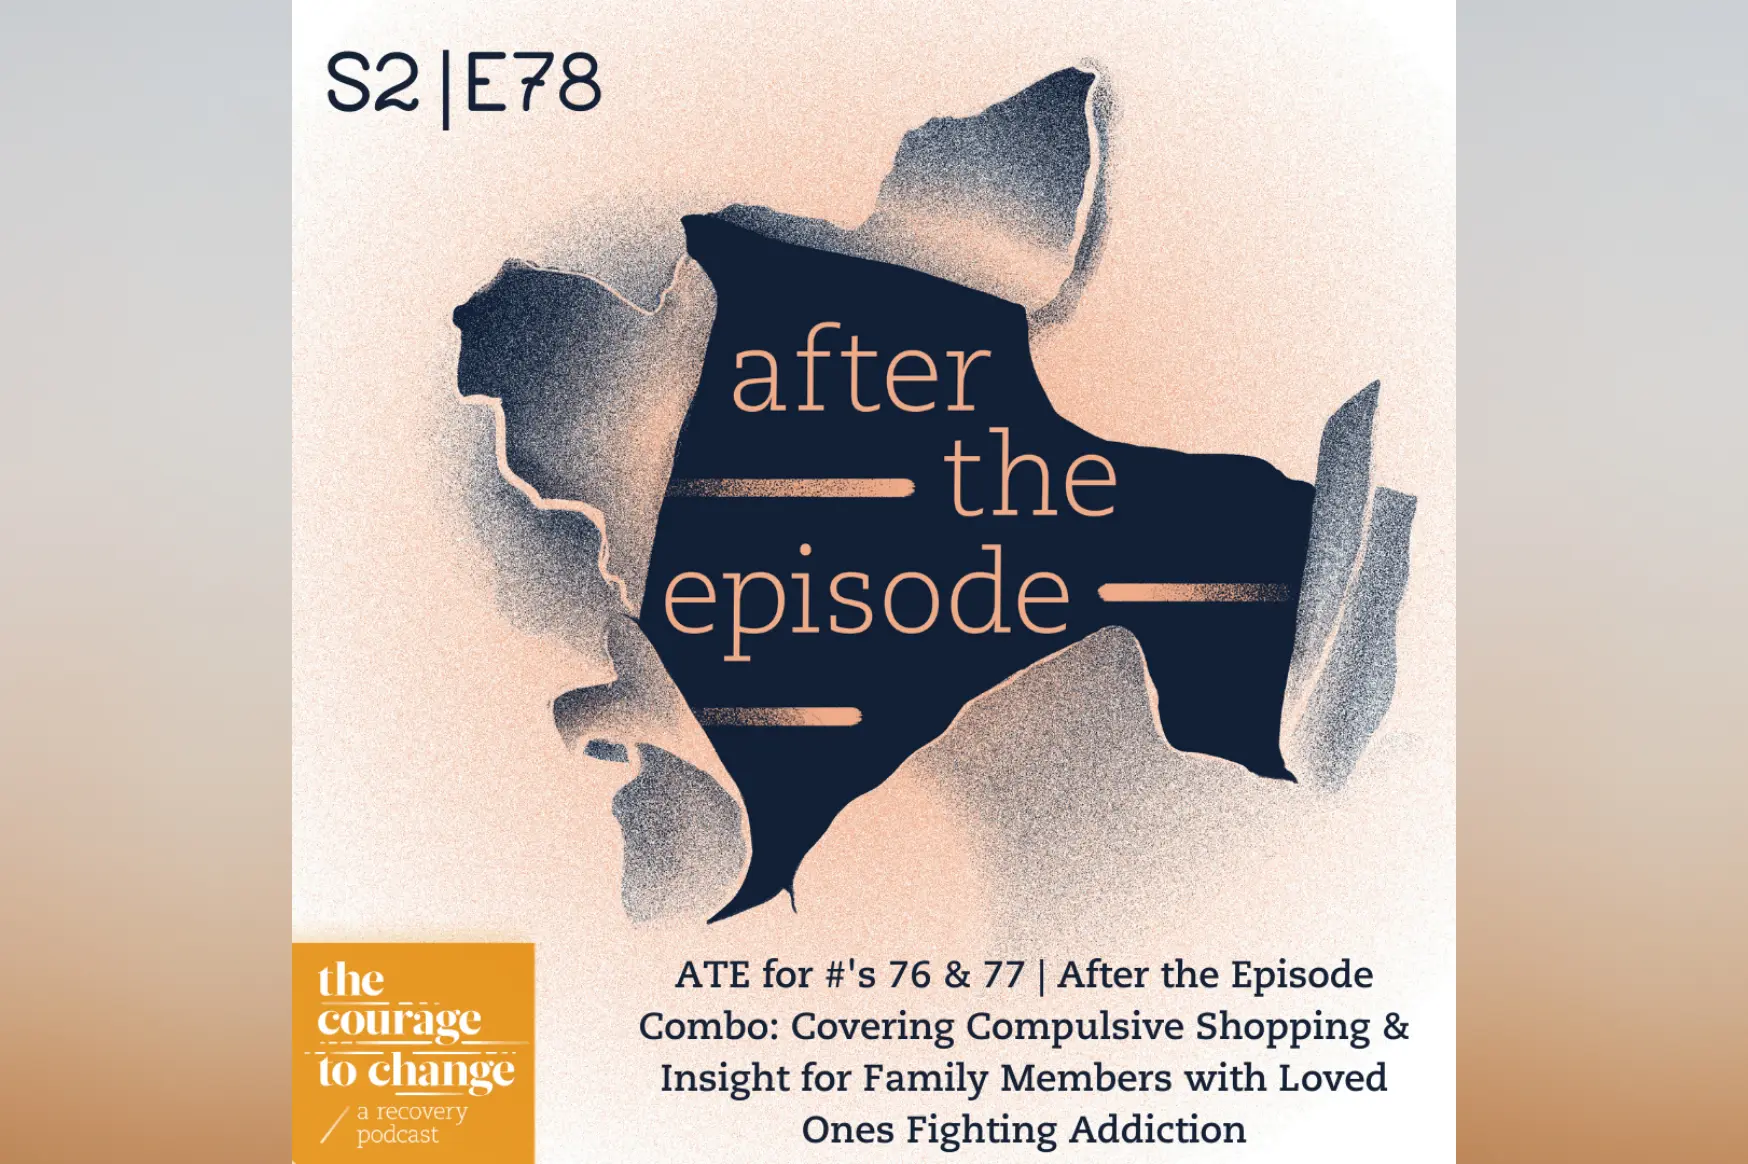 #78 - After the Episode